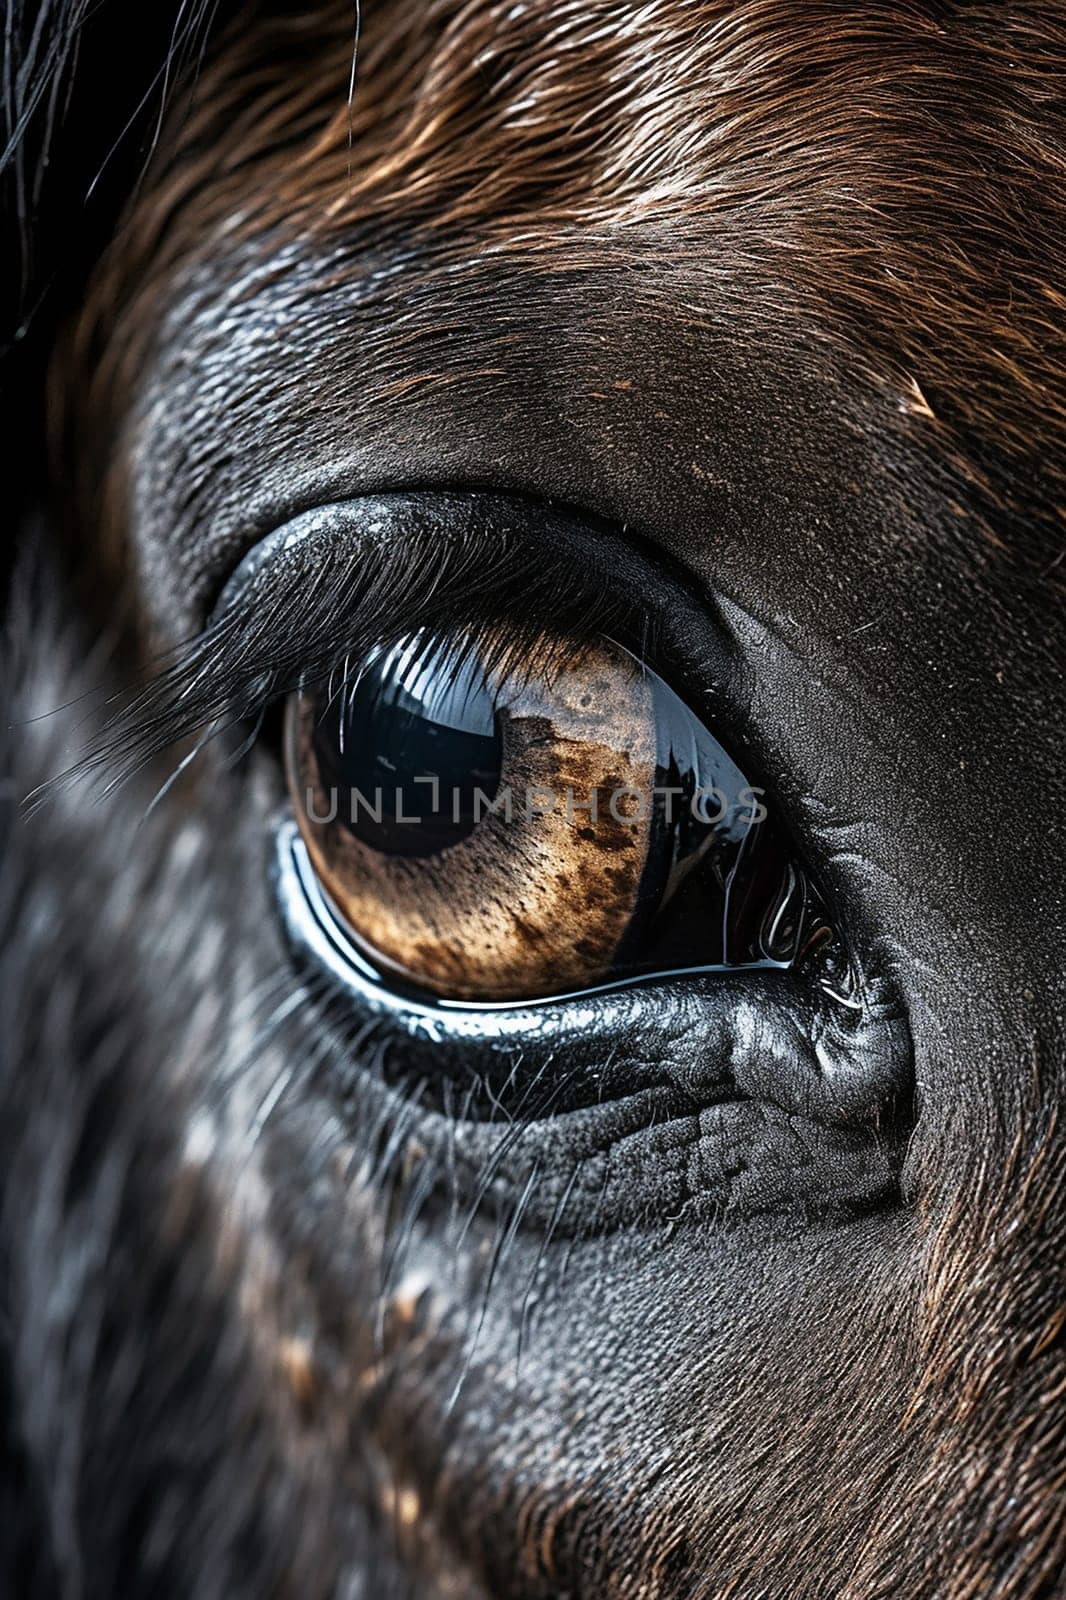 Beautiful close up of a horse eye by Hype2art